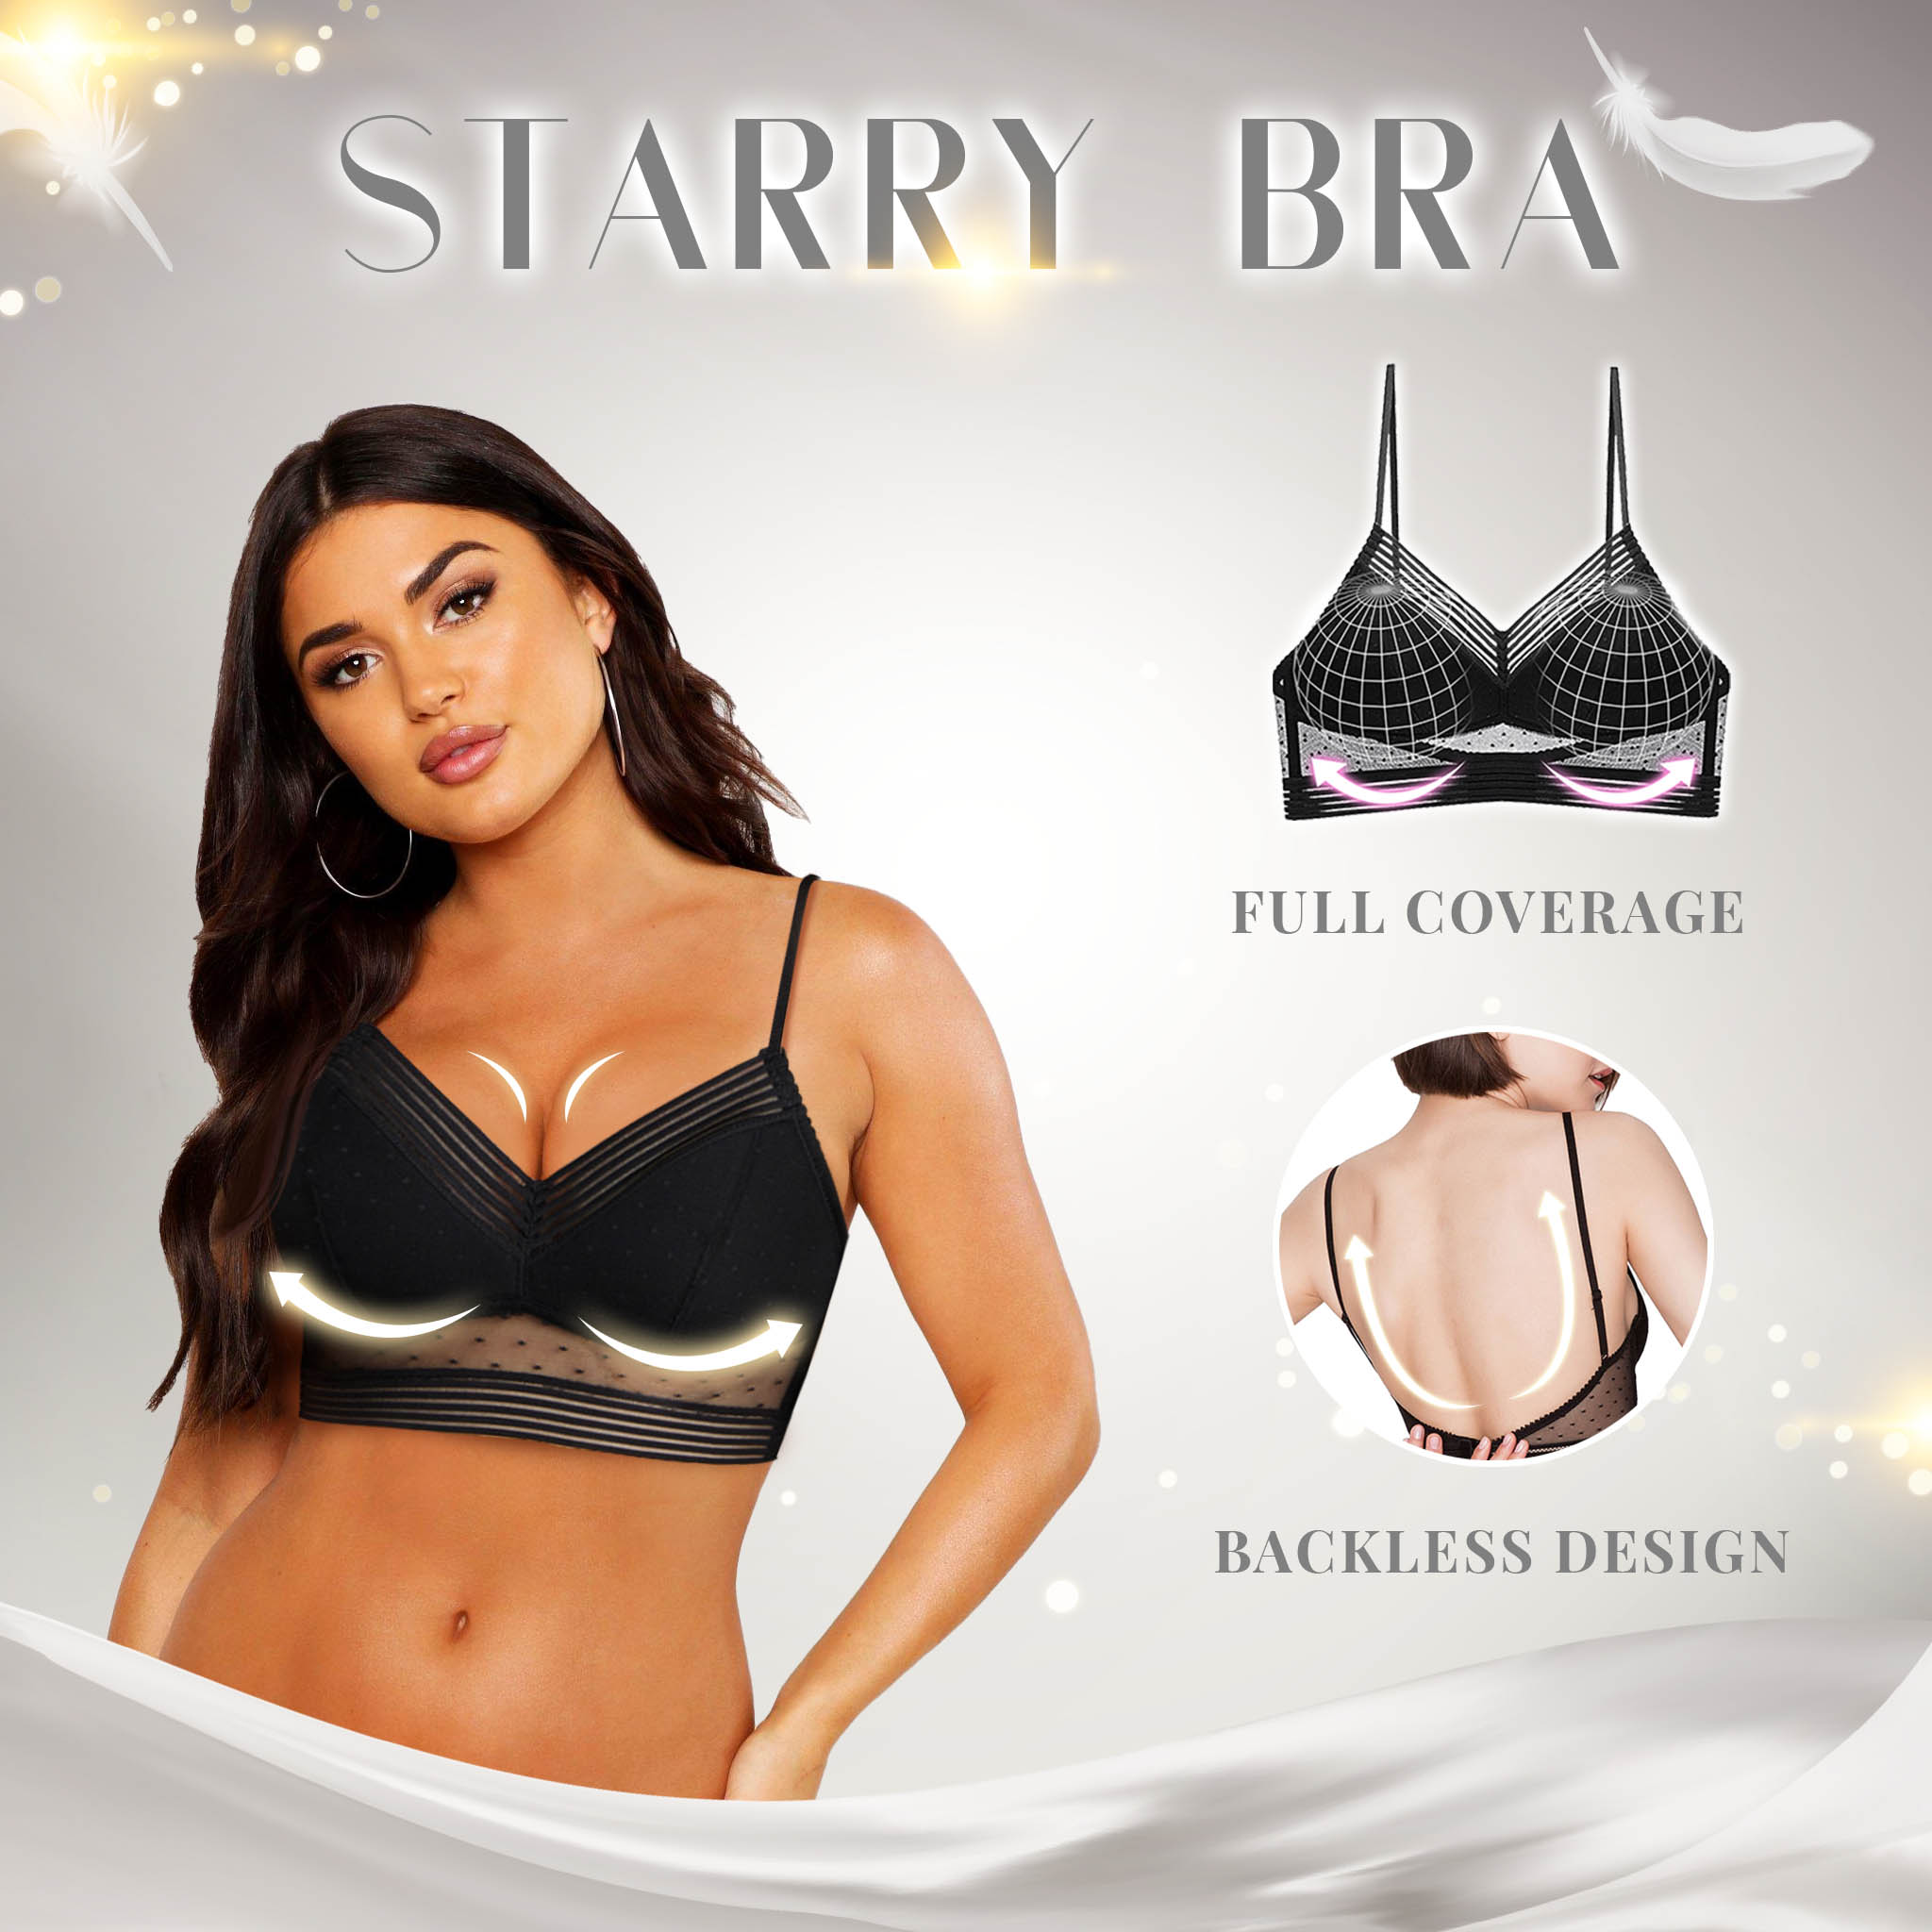 Starry Bra - Low Back Wireless Lifting Lace Bra,Deep V Invisible Support  Bra,U-Shaped Low Back Triangle Cup Push Up Bra (L, Black+White)